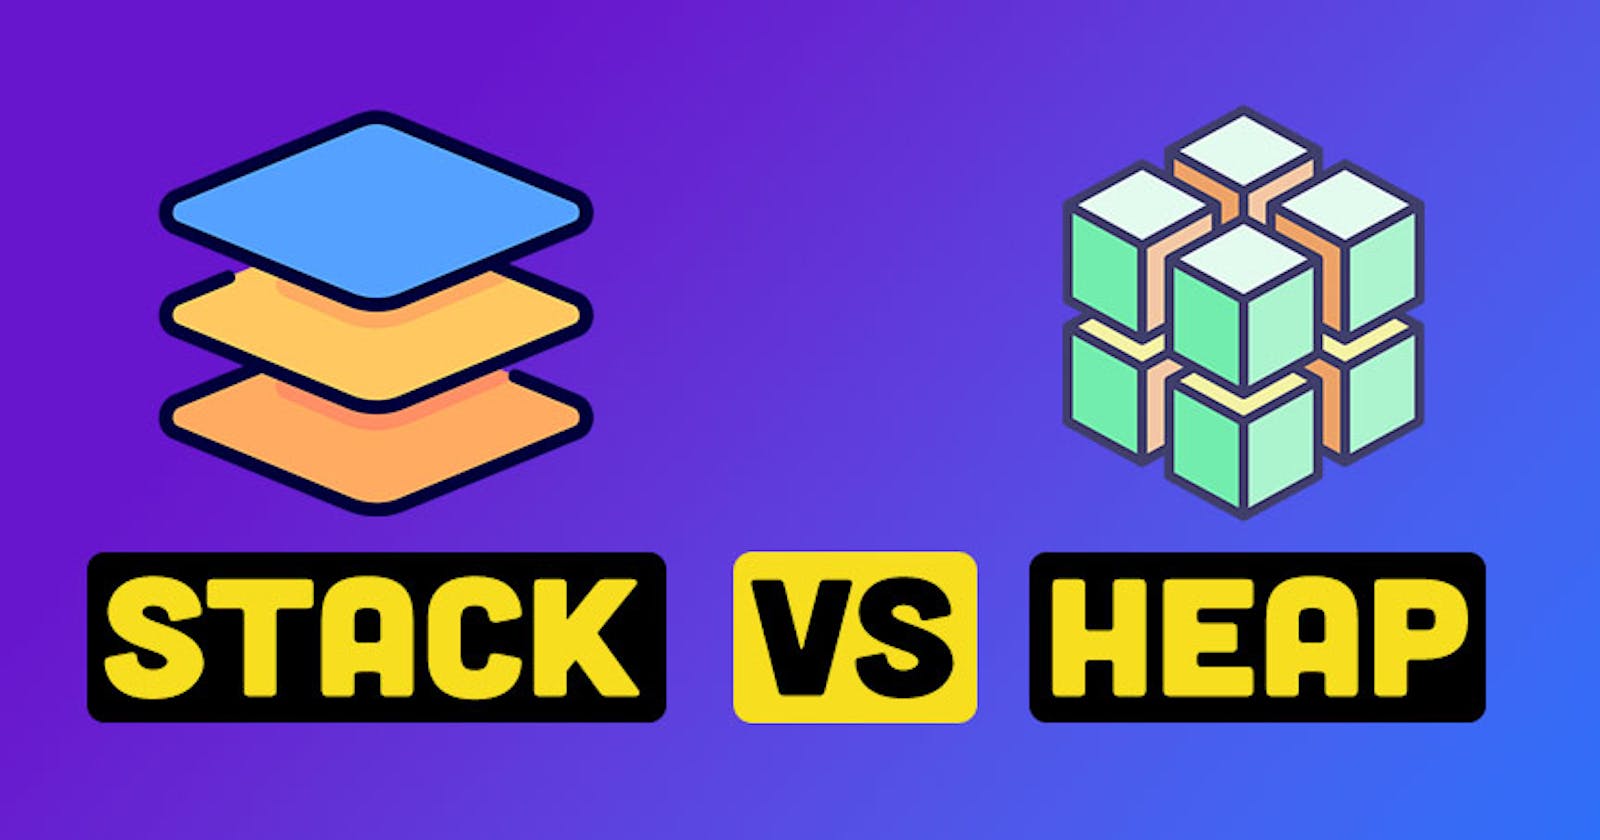 Stack vs Heap Memory - What are the differences?